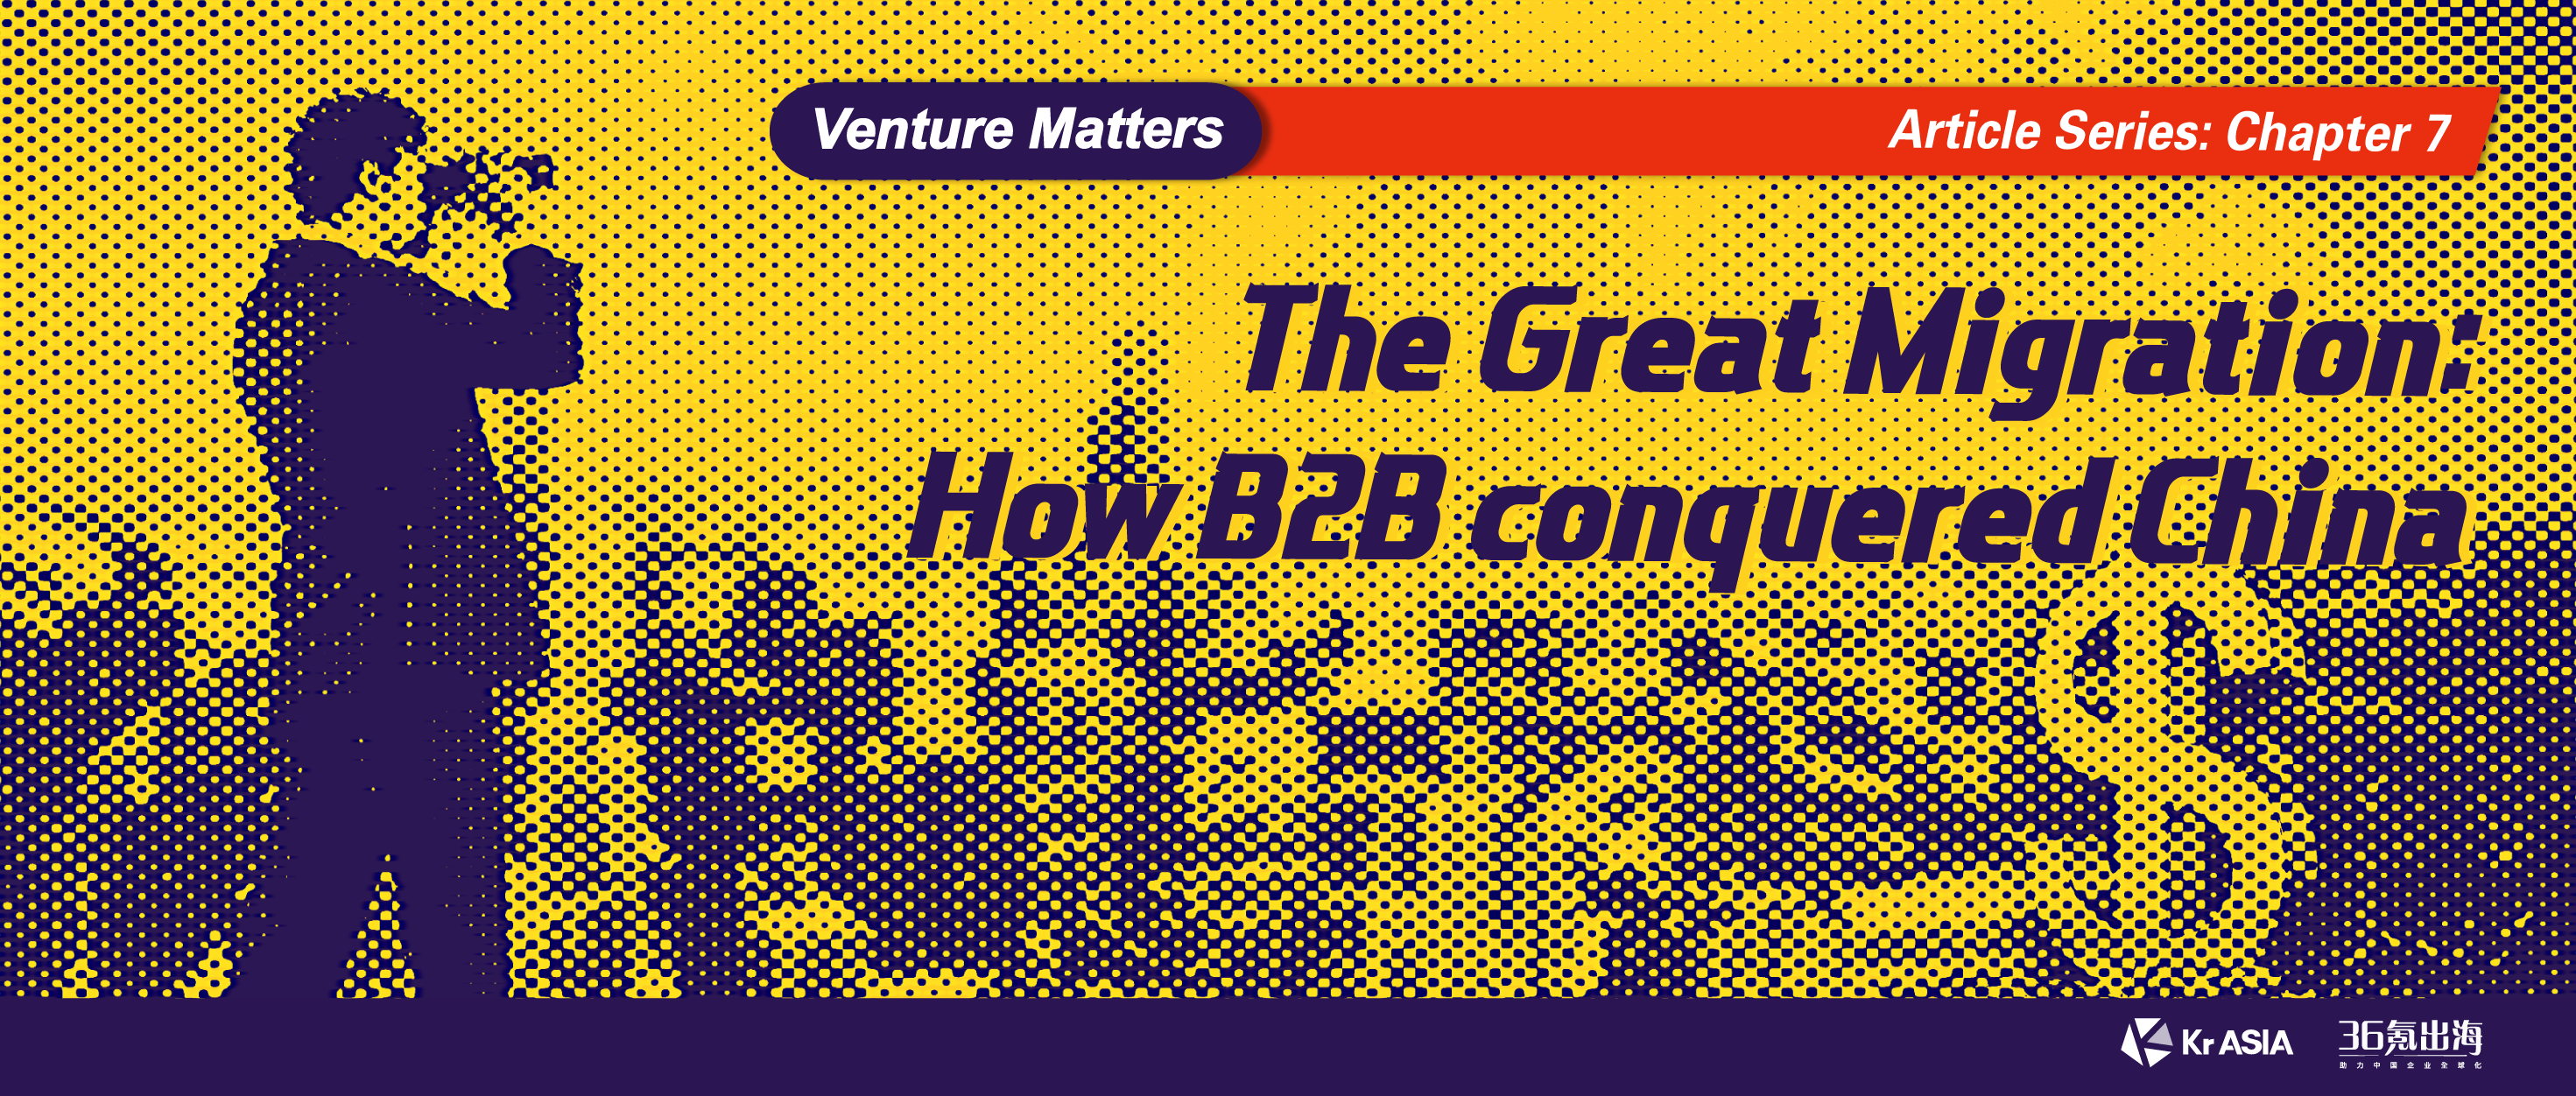 Venture Matters: The Great Migration—How B2B conquered China (Part 1 of 2)